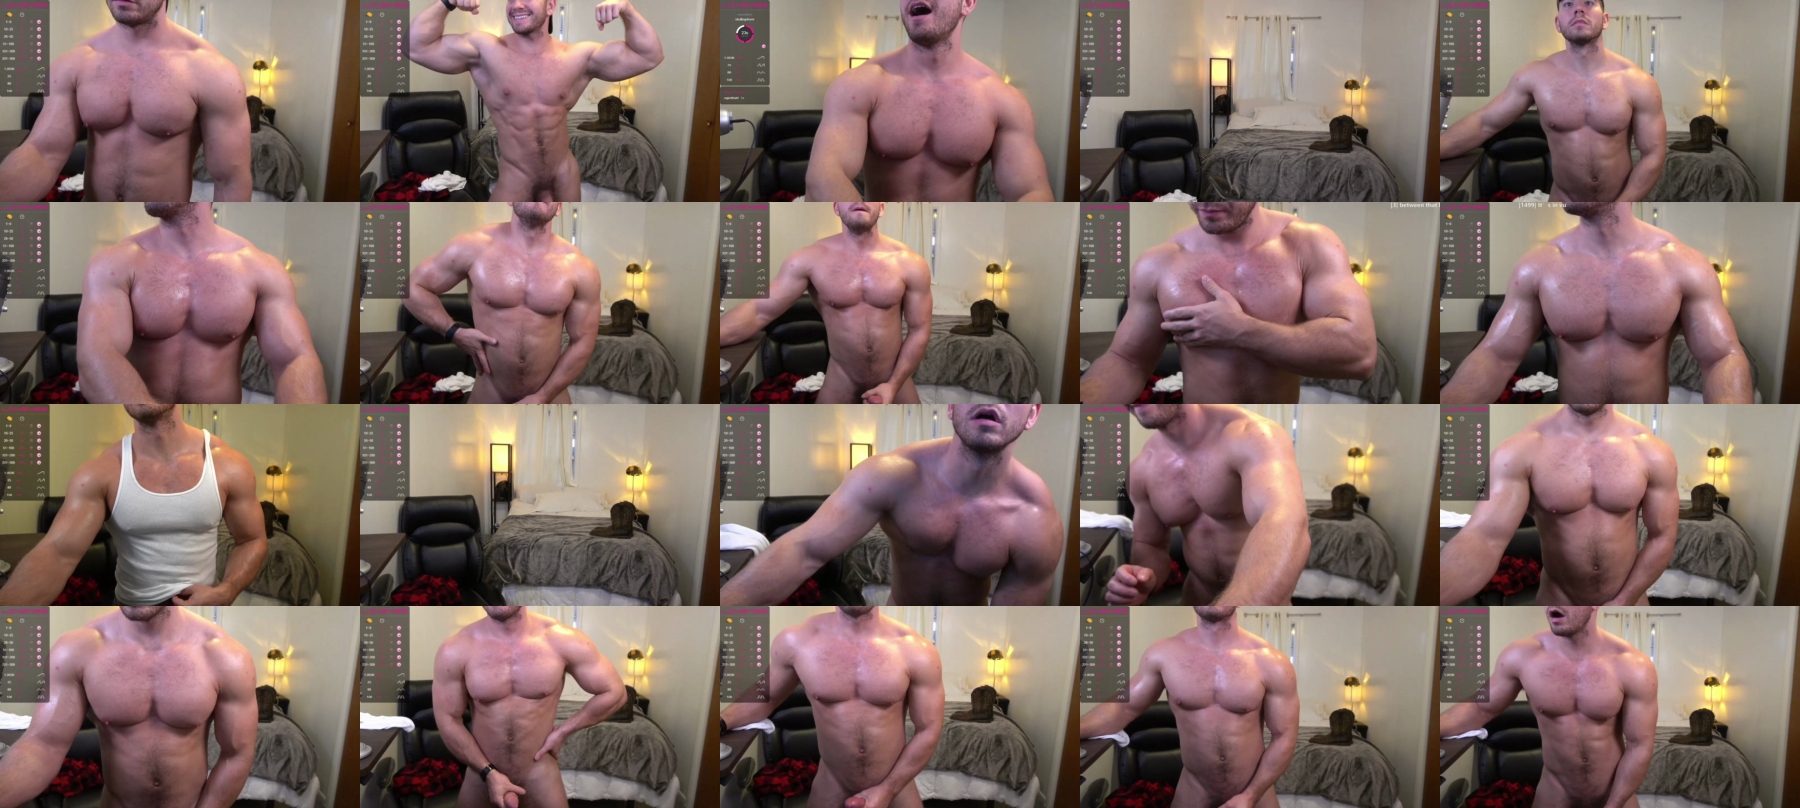 Hotmuscles6t9  21-11-2021 Male Topless